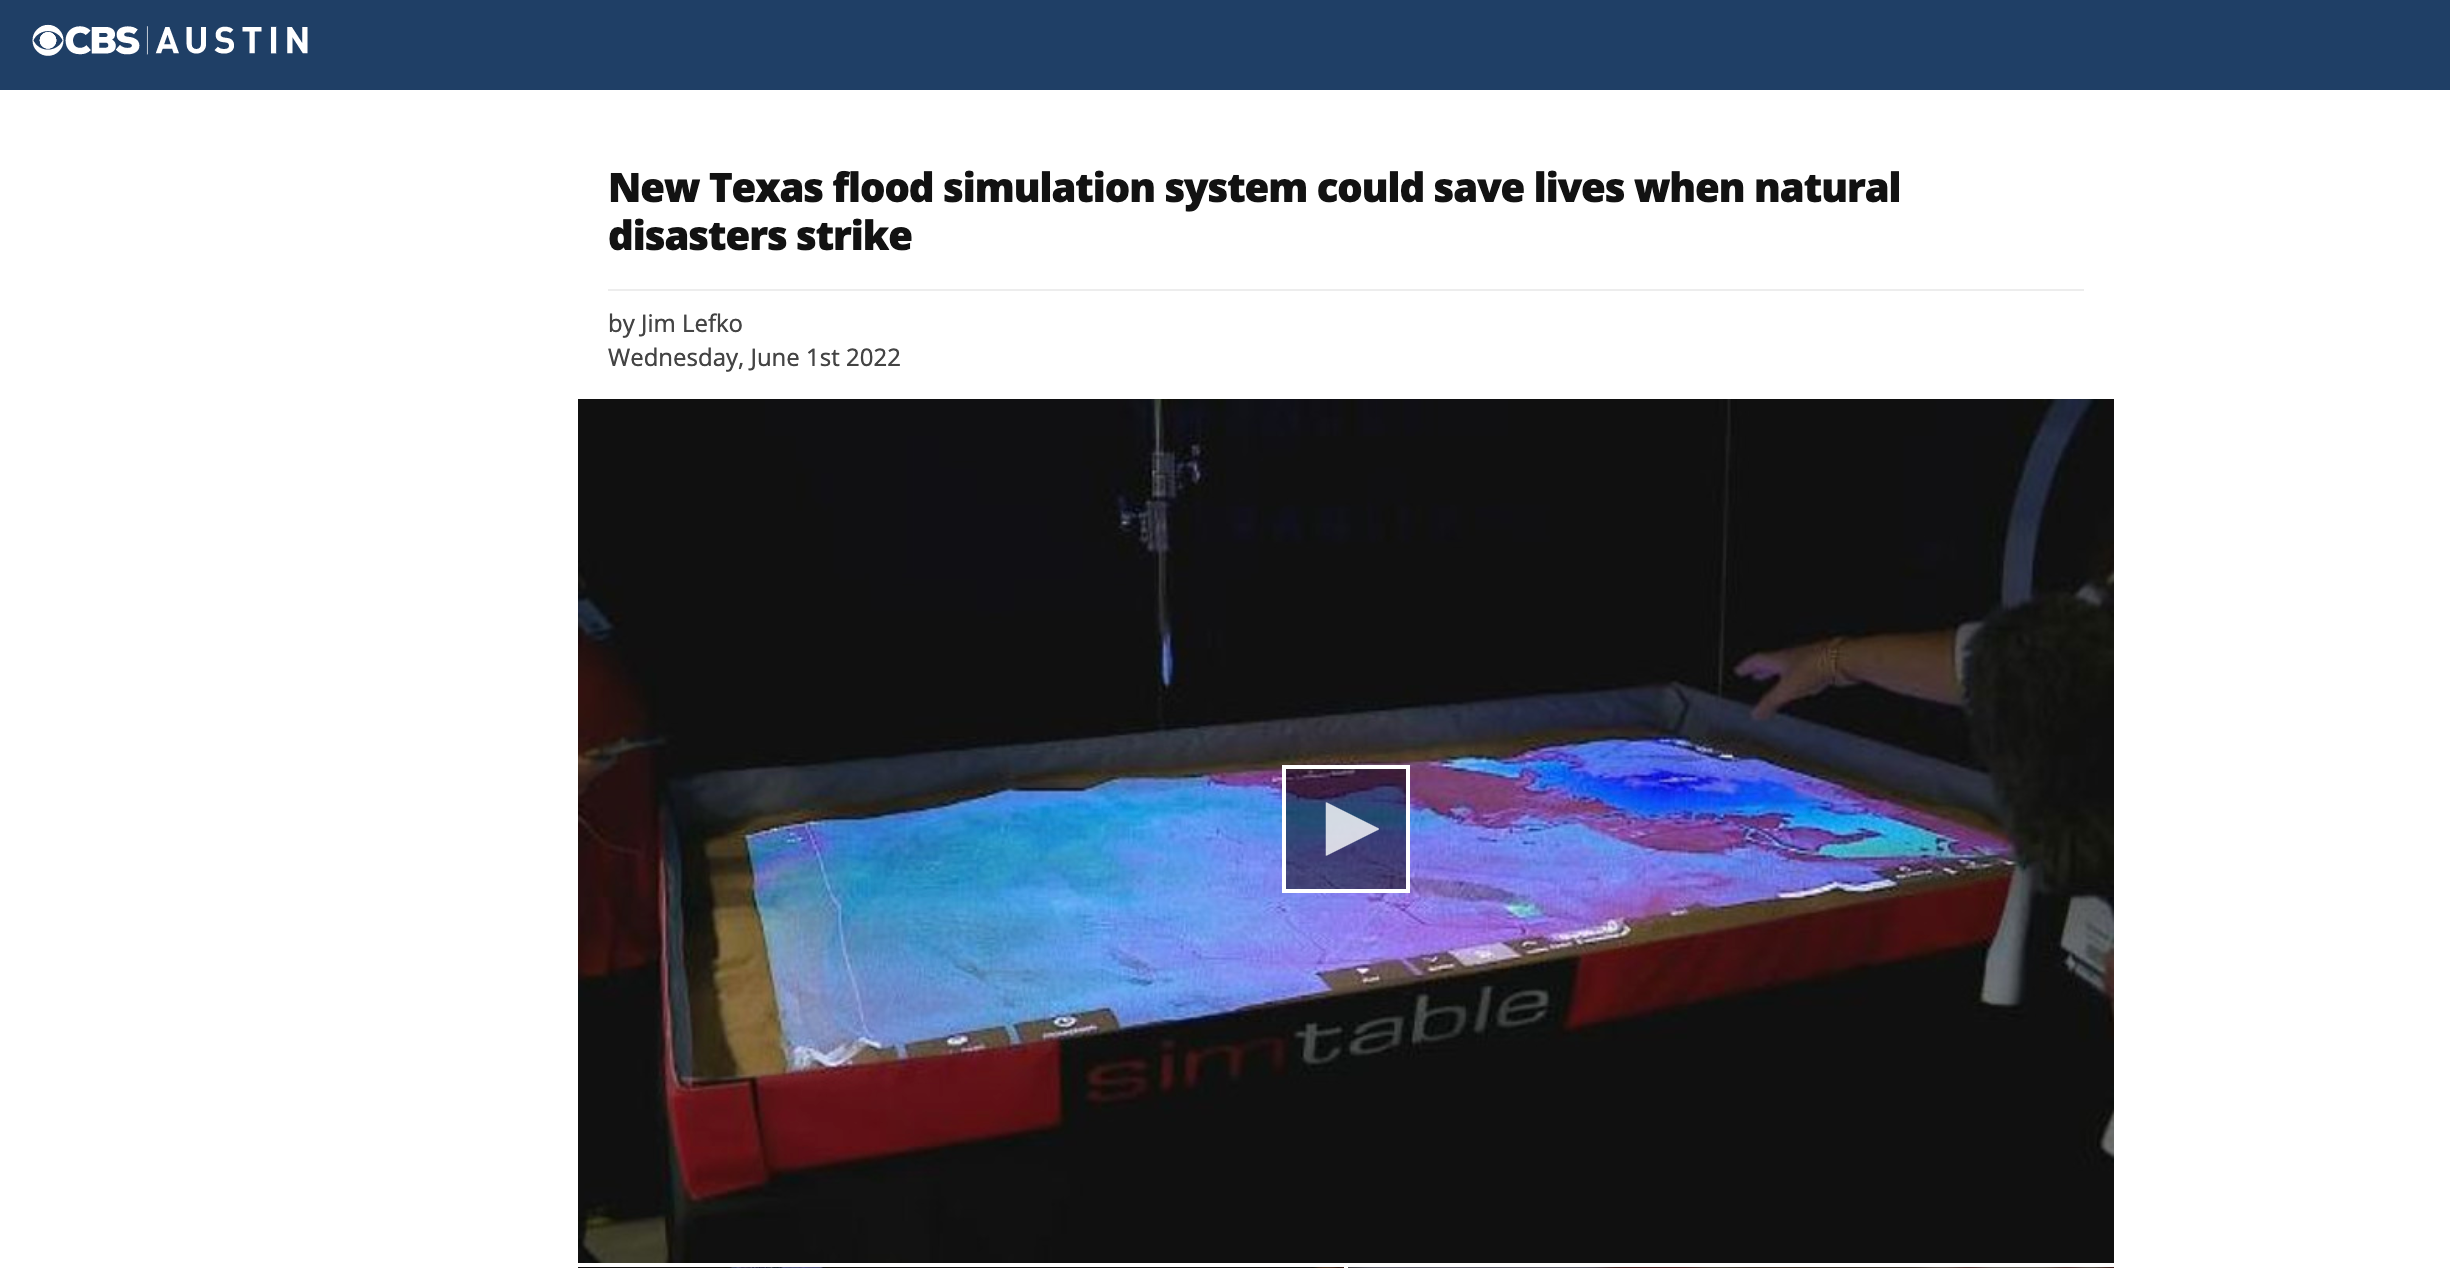 CBS Austin New Texas flood simulation system could save lives when natural disasters strike